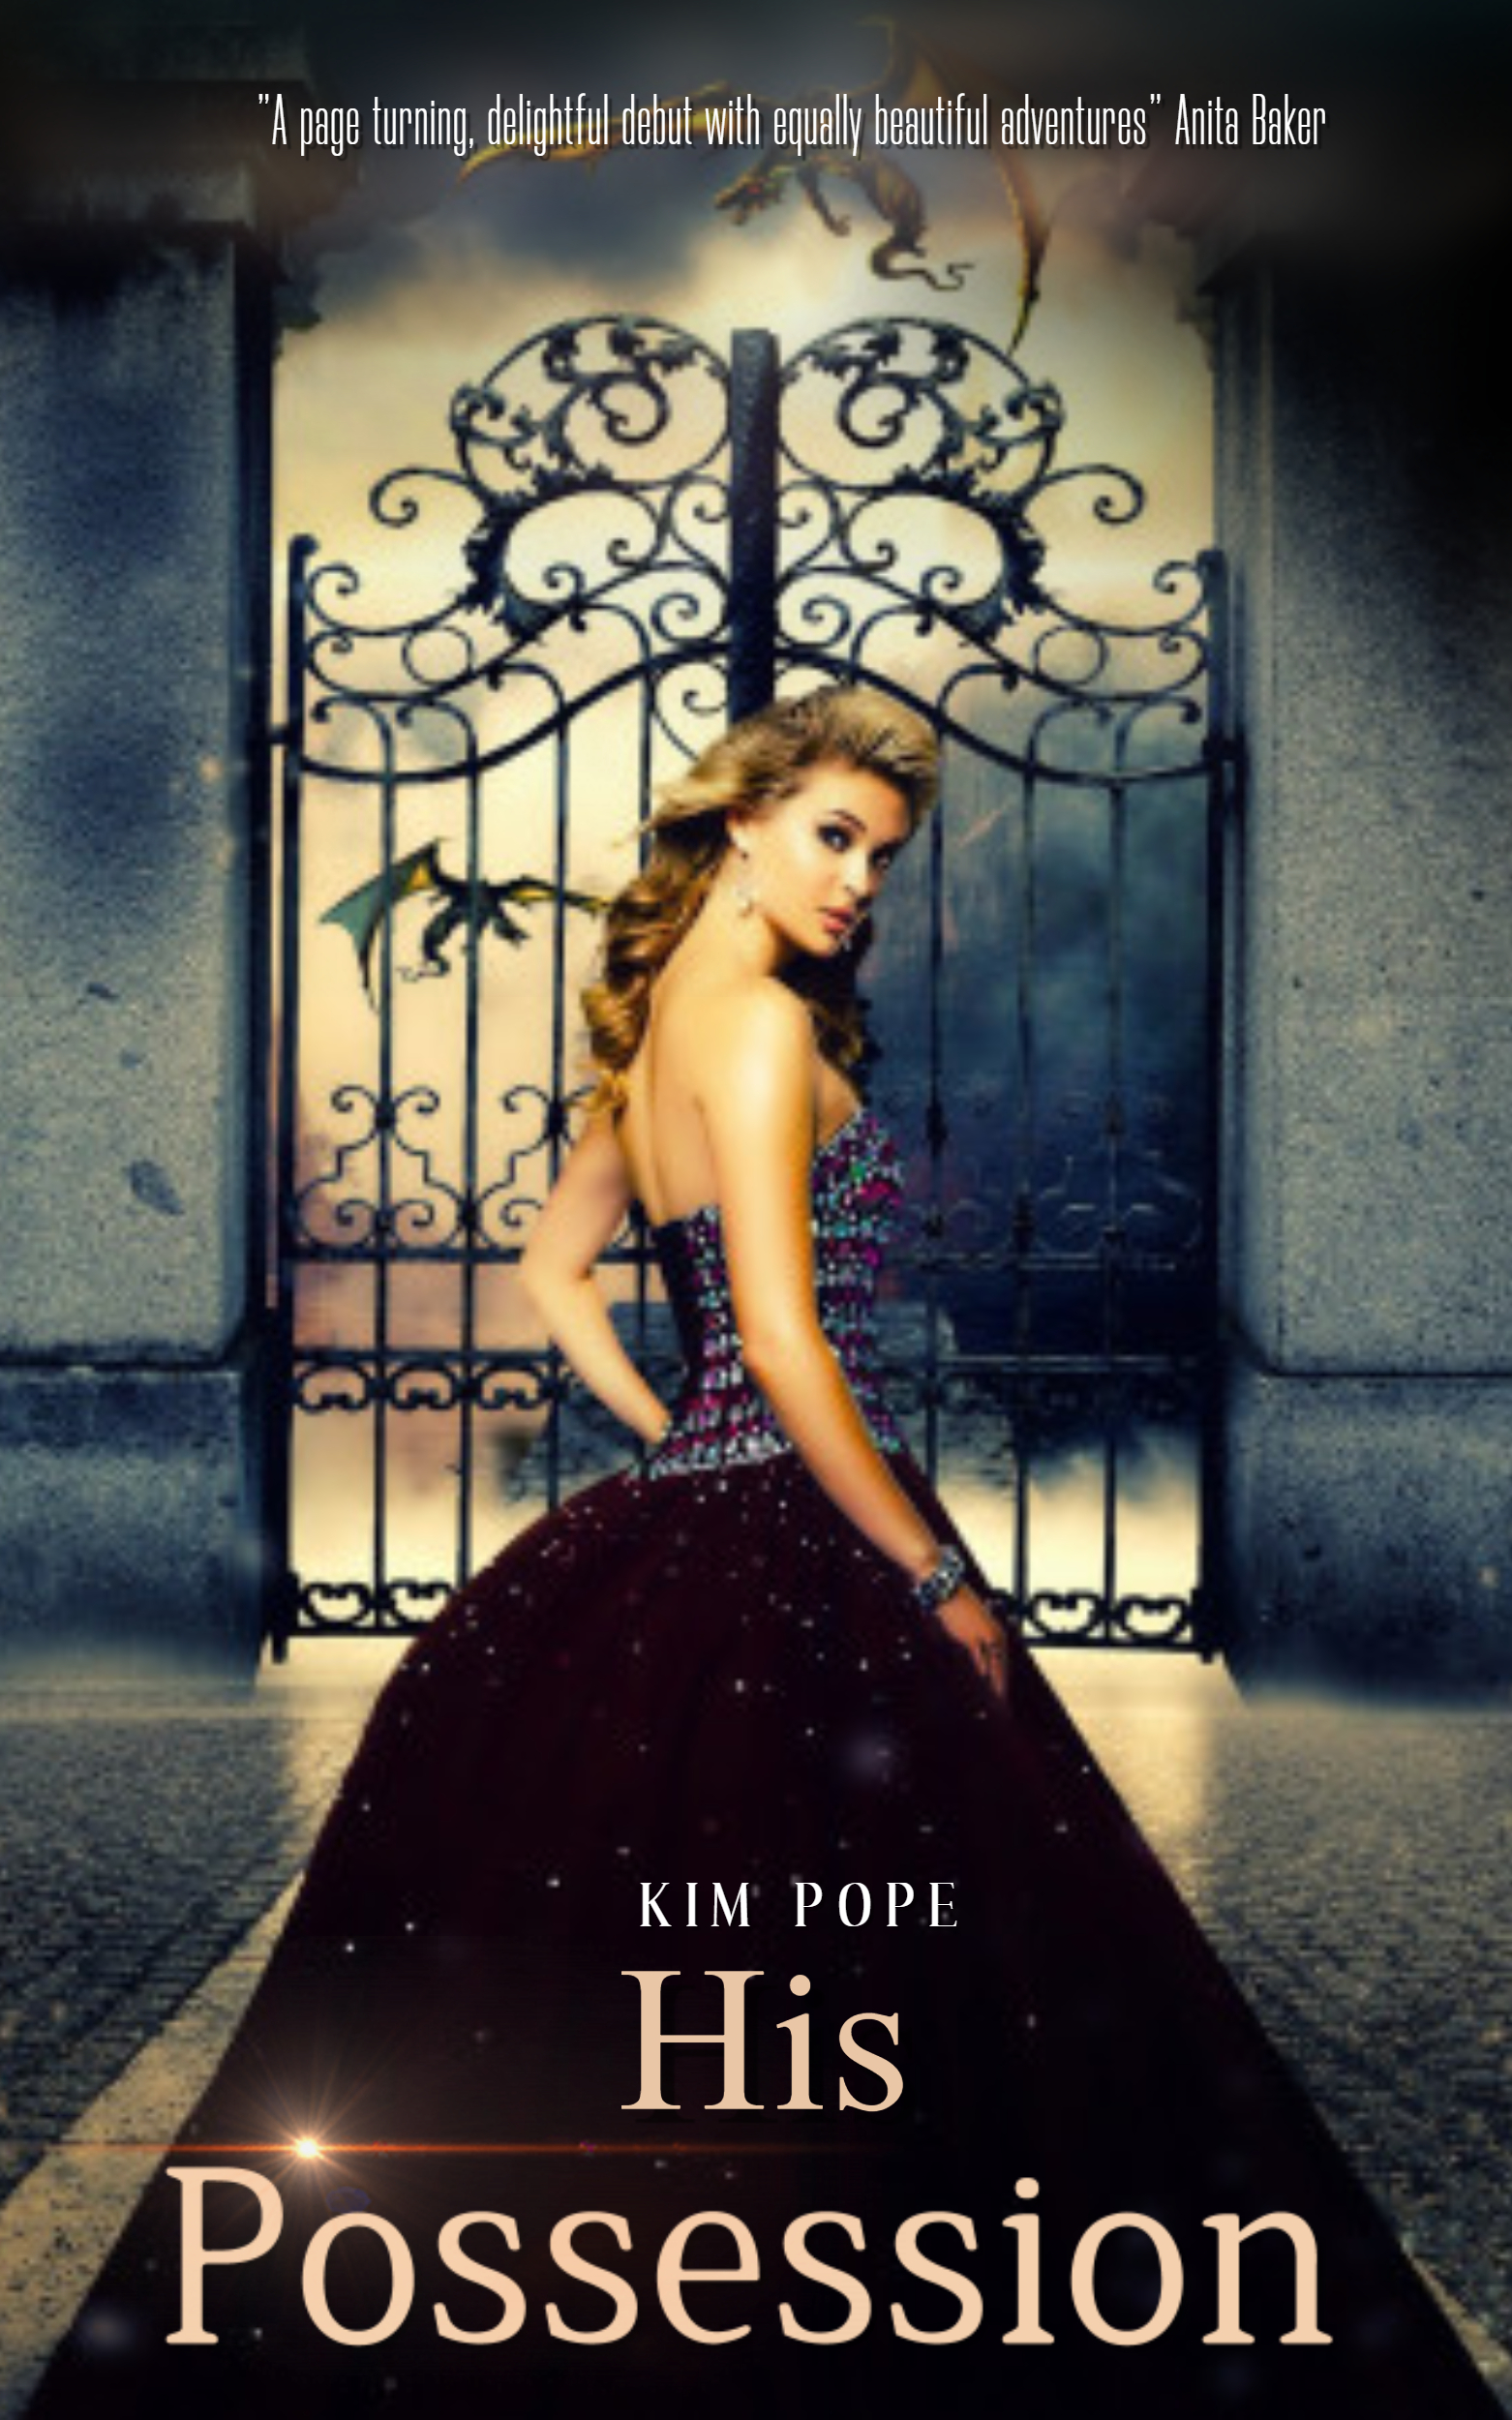 FREE: His possession by Kim Pope by Kim Pope